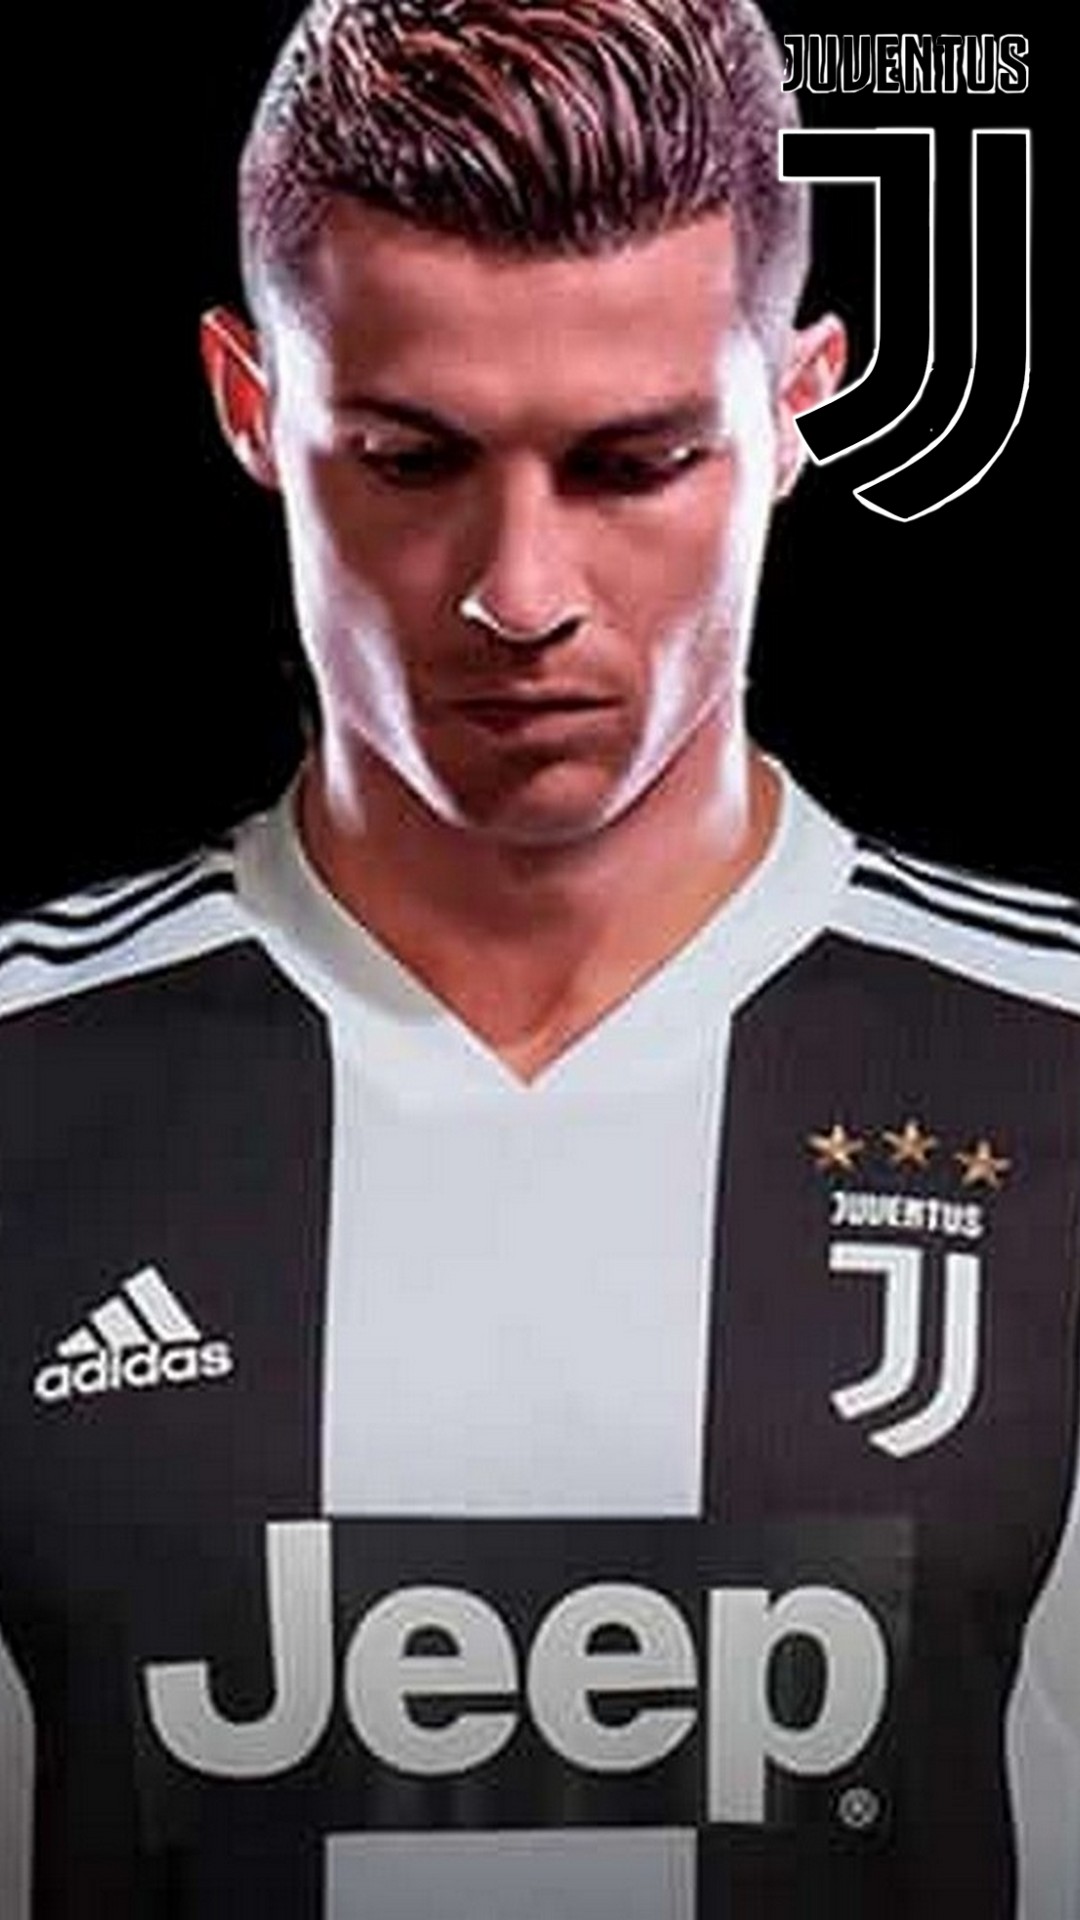 C Ronaldo Juventus iPhone Wallpapers With Resolution 1080X1920 pixel. You can make this wallpaper for your Mac or Windows Desktop Background, iPhone, Android or Tablet and another Smartphone device for free